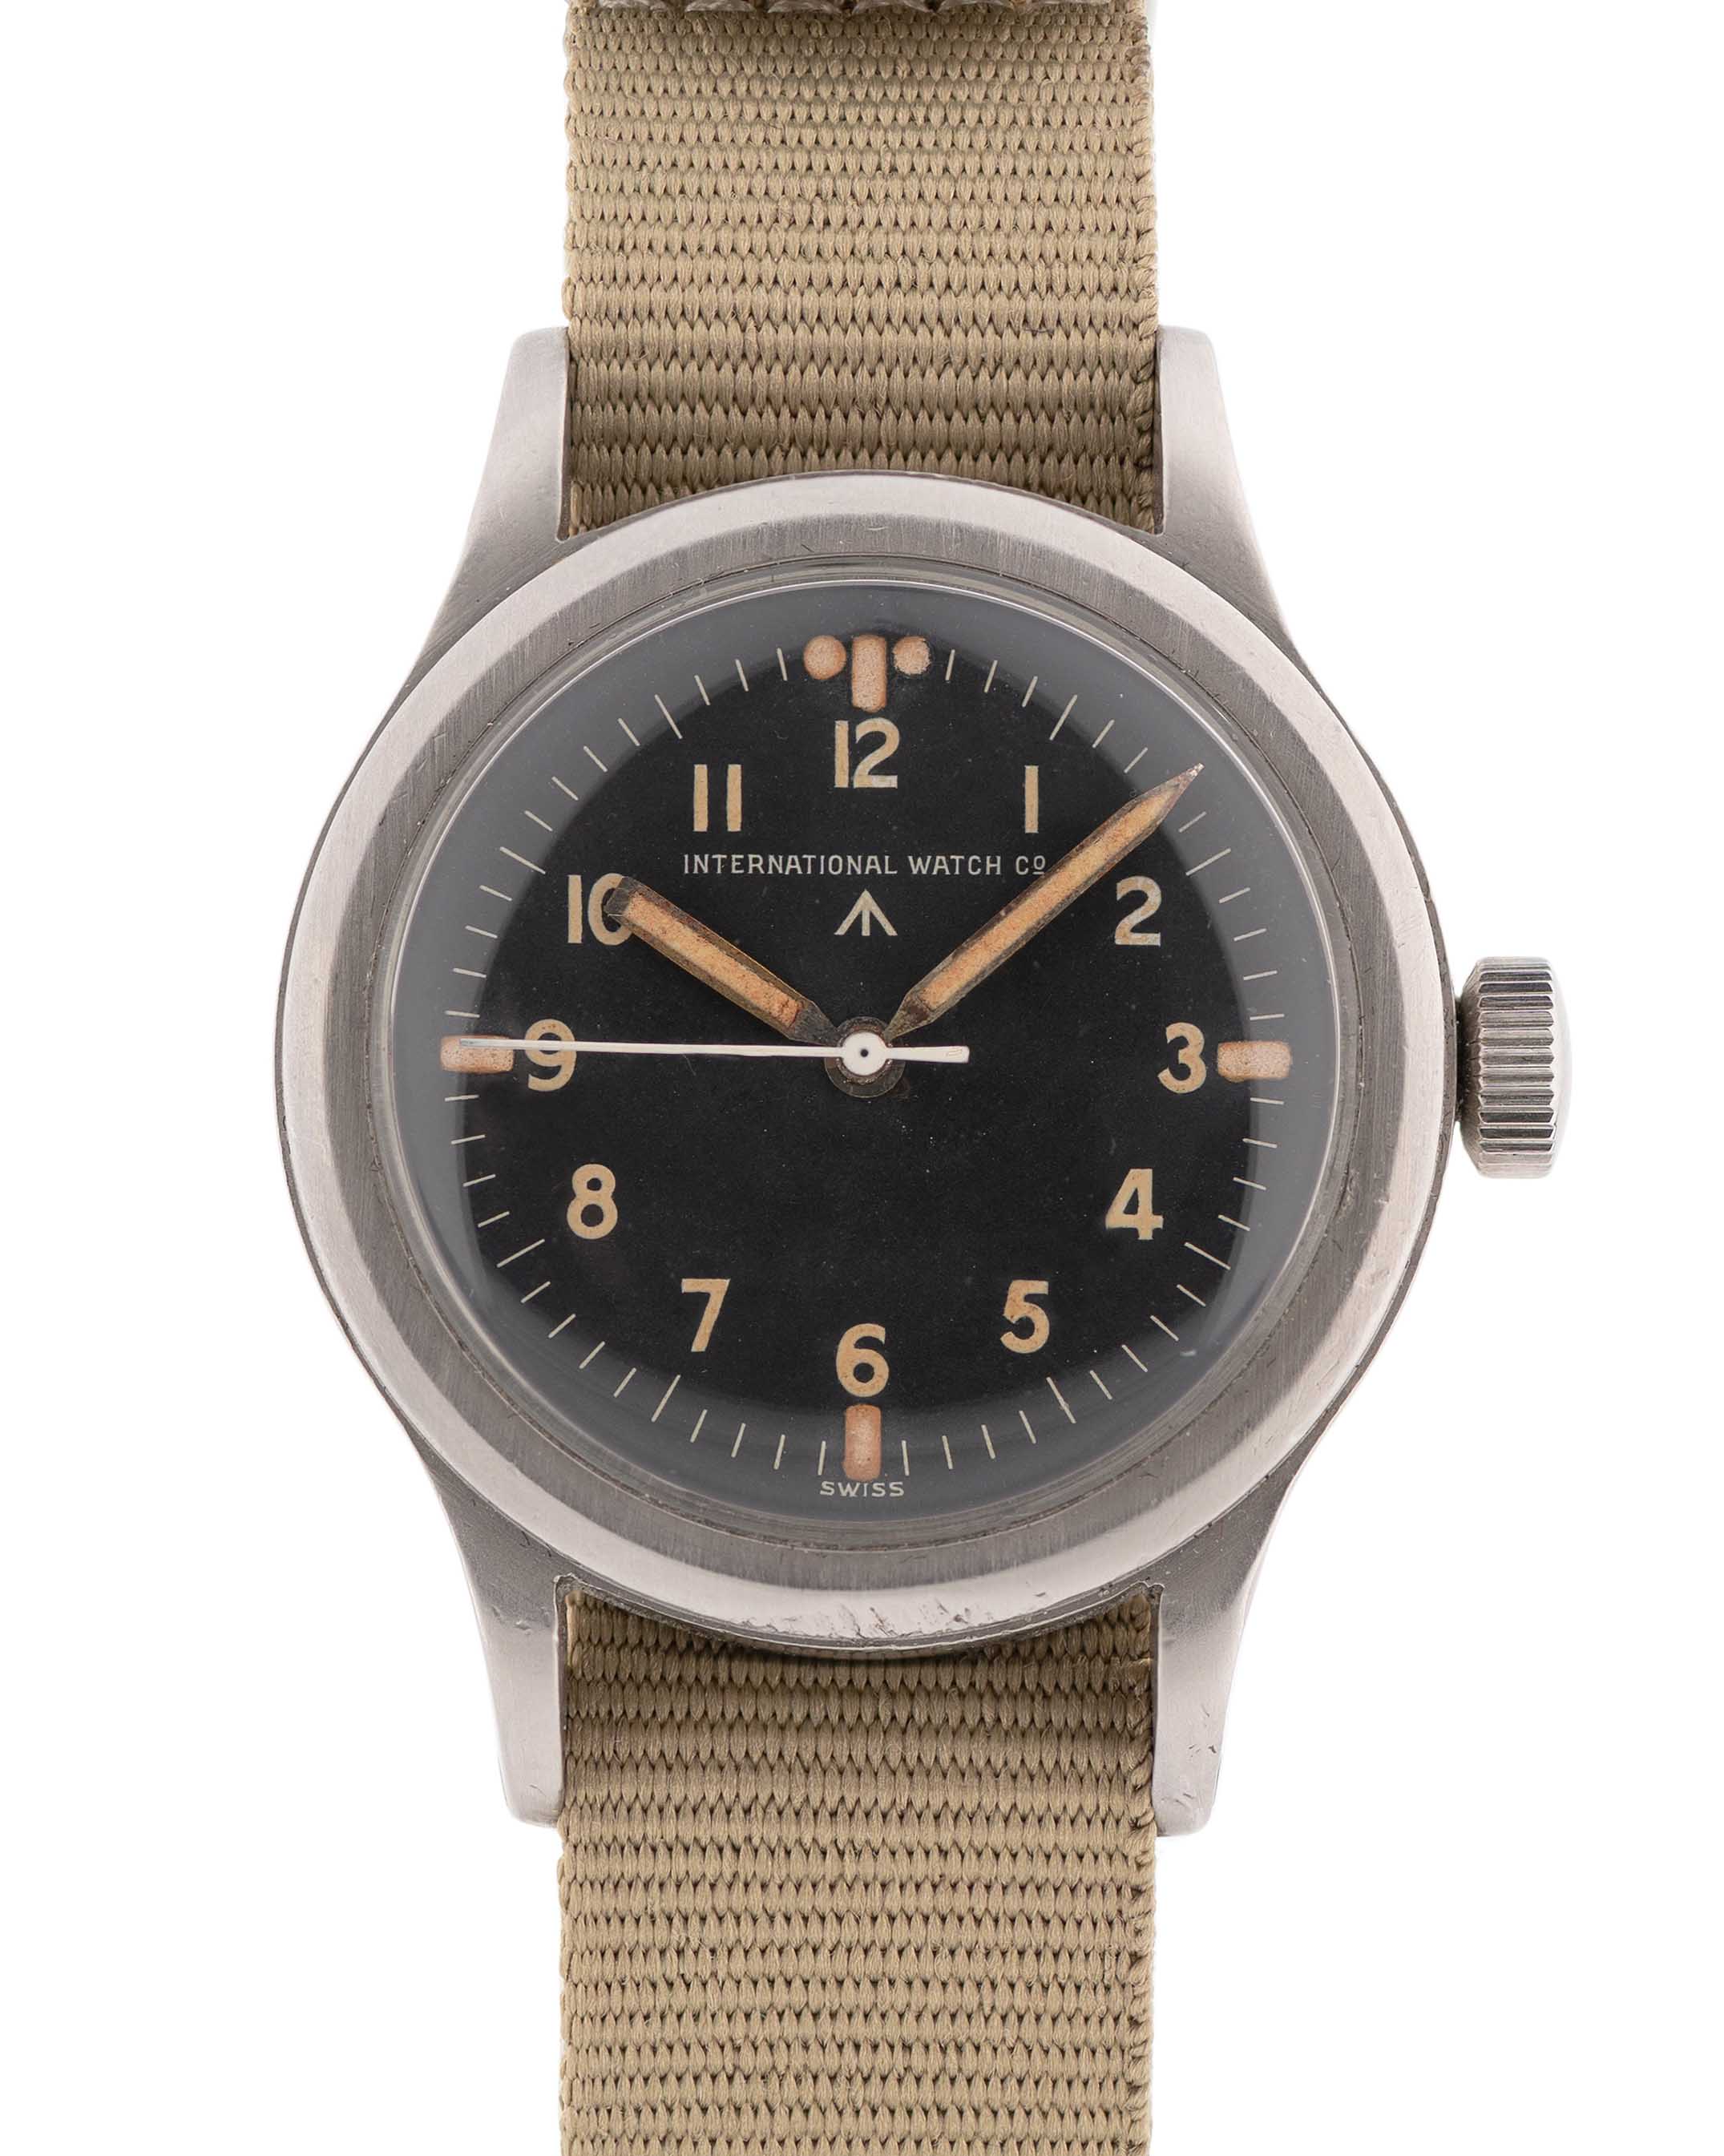 A VERY RARE GENTLEMAN'S STAINLESS STEEL BRITISH MILITARY IWC MARK 11 RAF PILOTS WRSIT WATCH DATED - Image 3 of 11